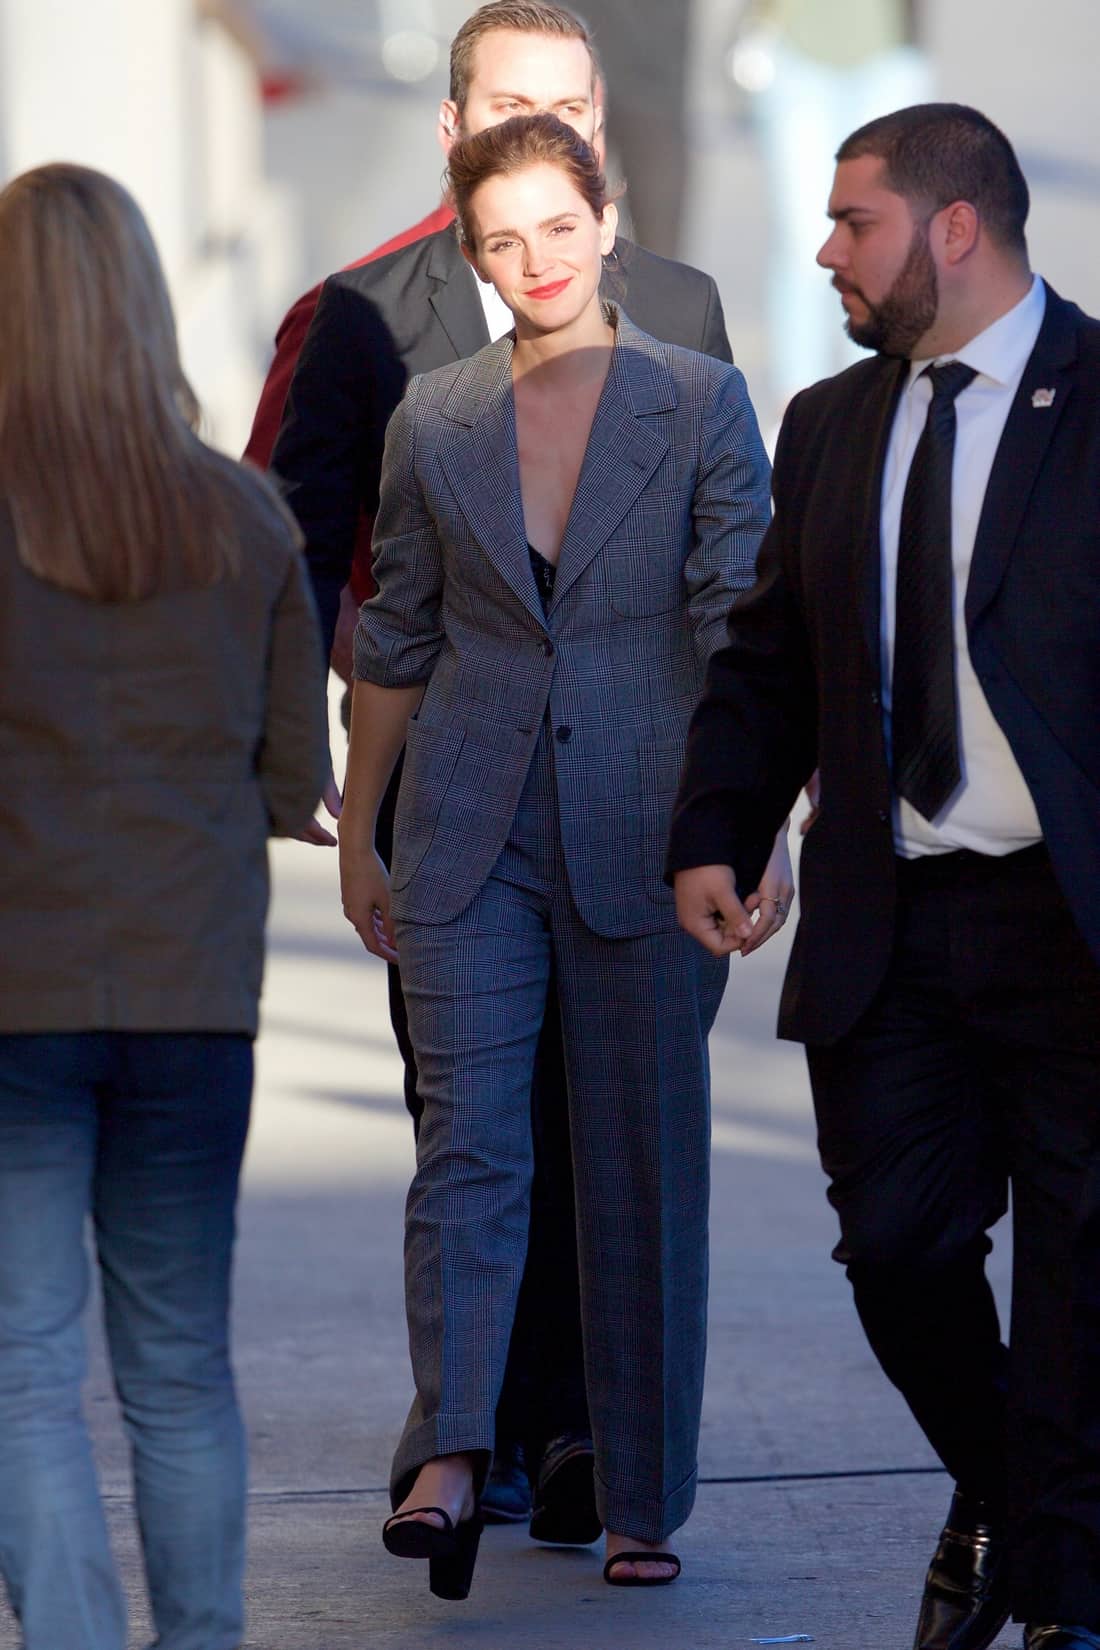 Emma Watson Looked Incredible in a Gray Plaid Pantsuit at Jimmy Kimmel Live!